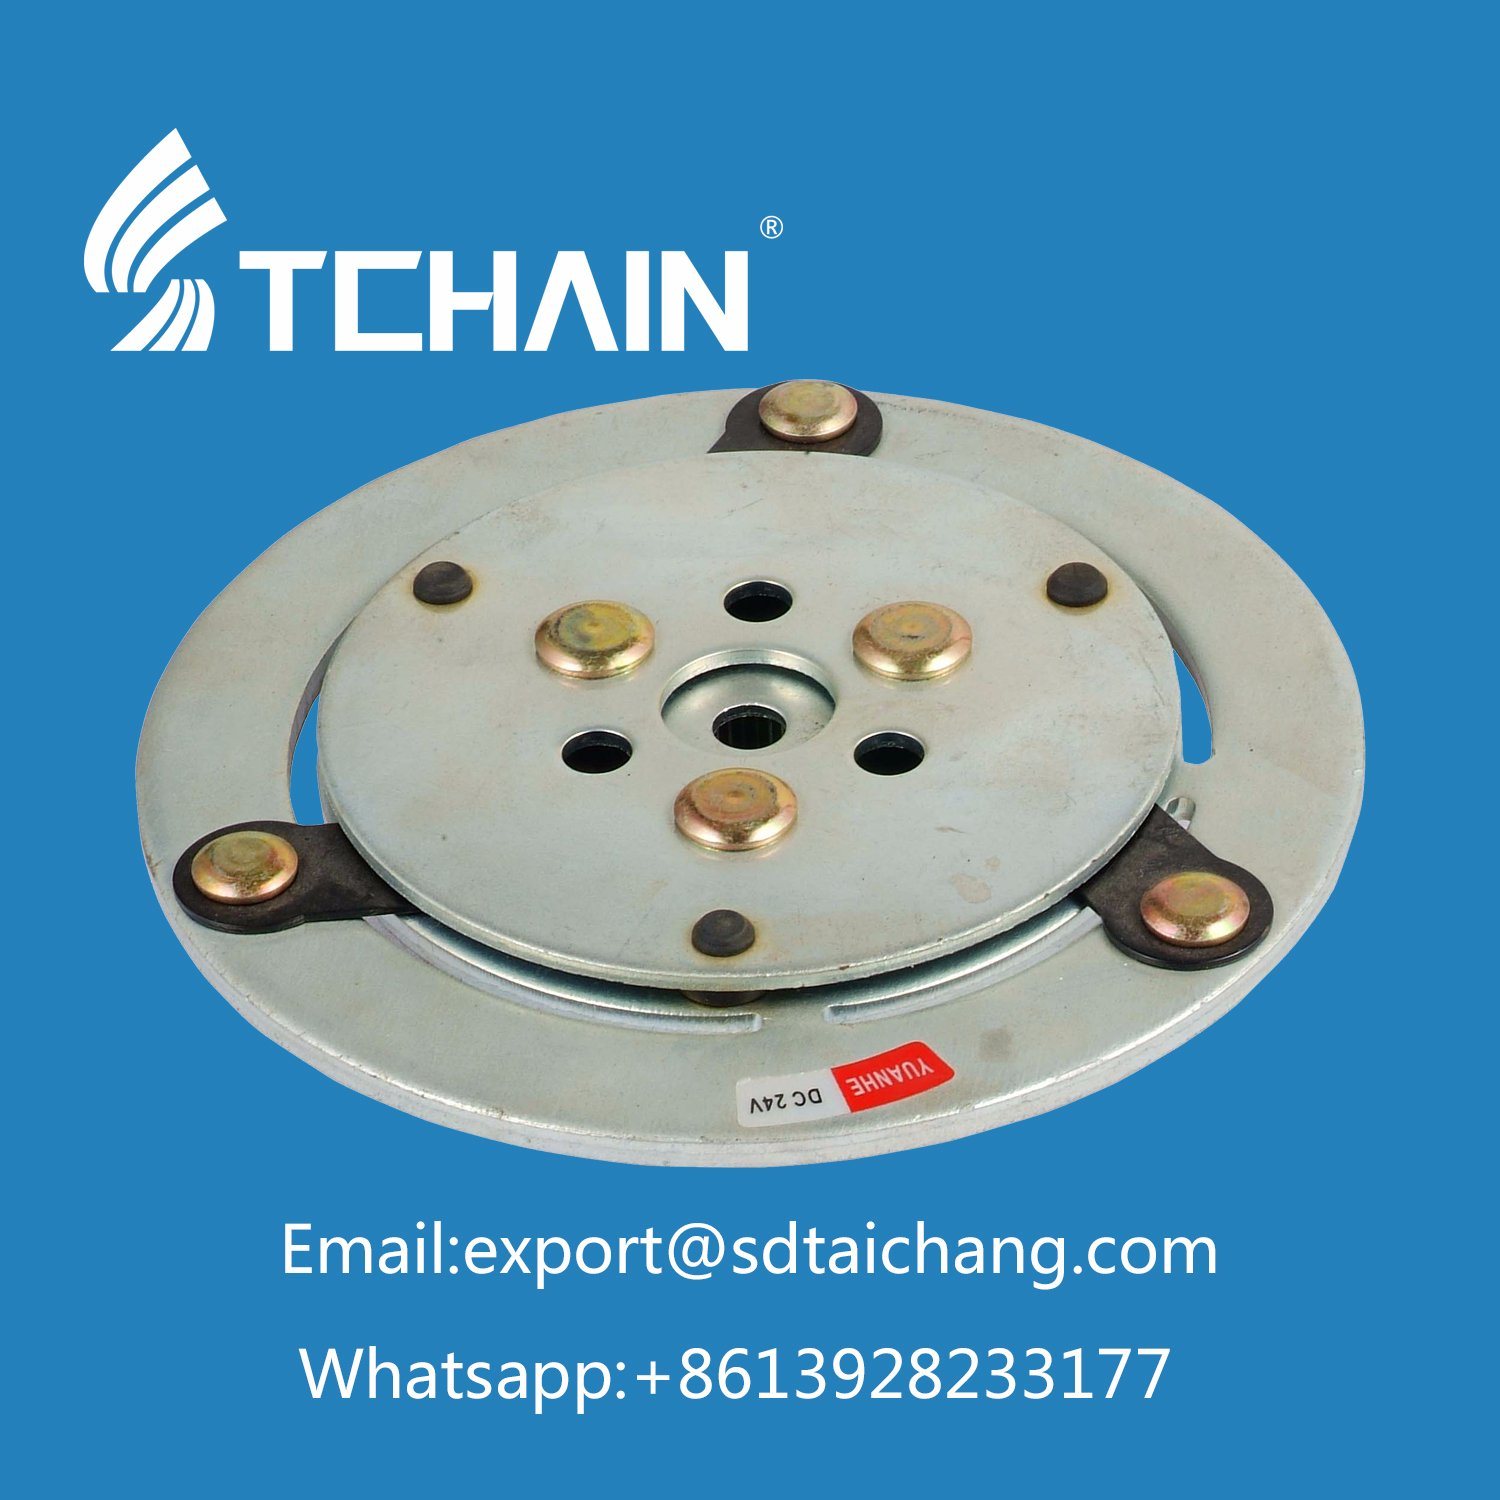 BRT Bus Air Conditioning Spare Parts Pressure Plate